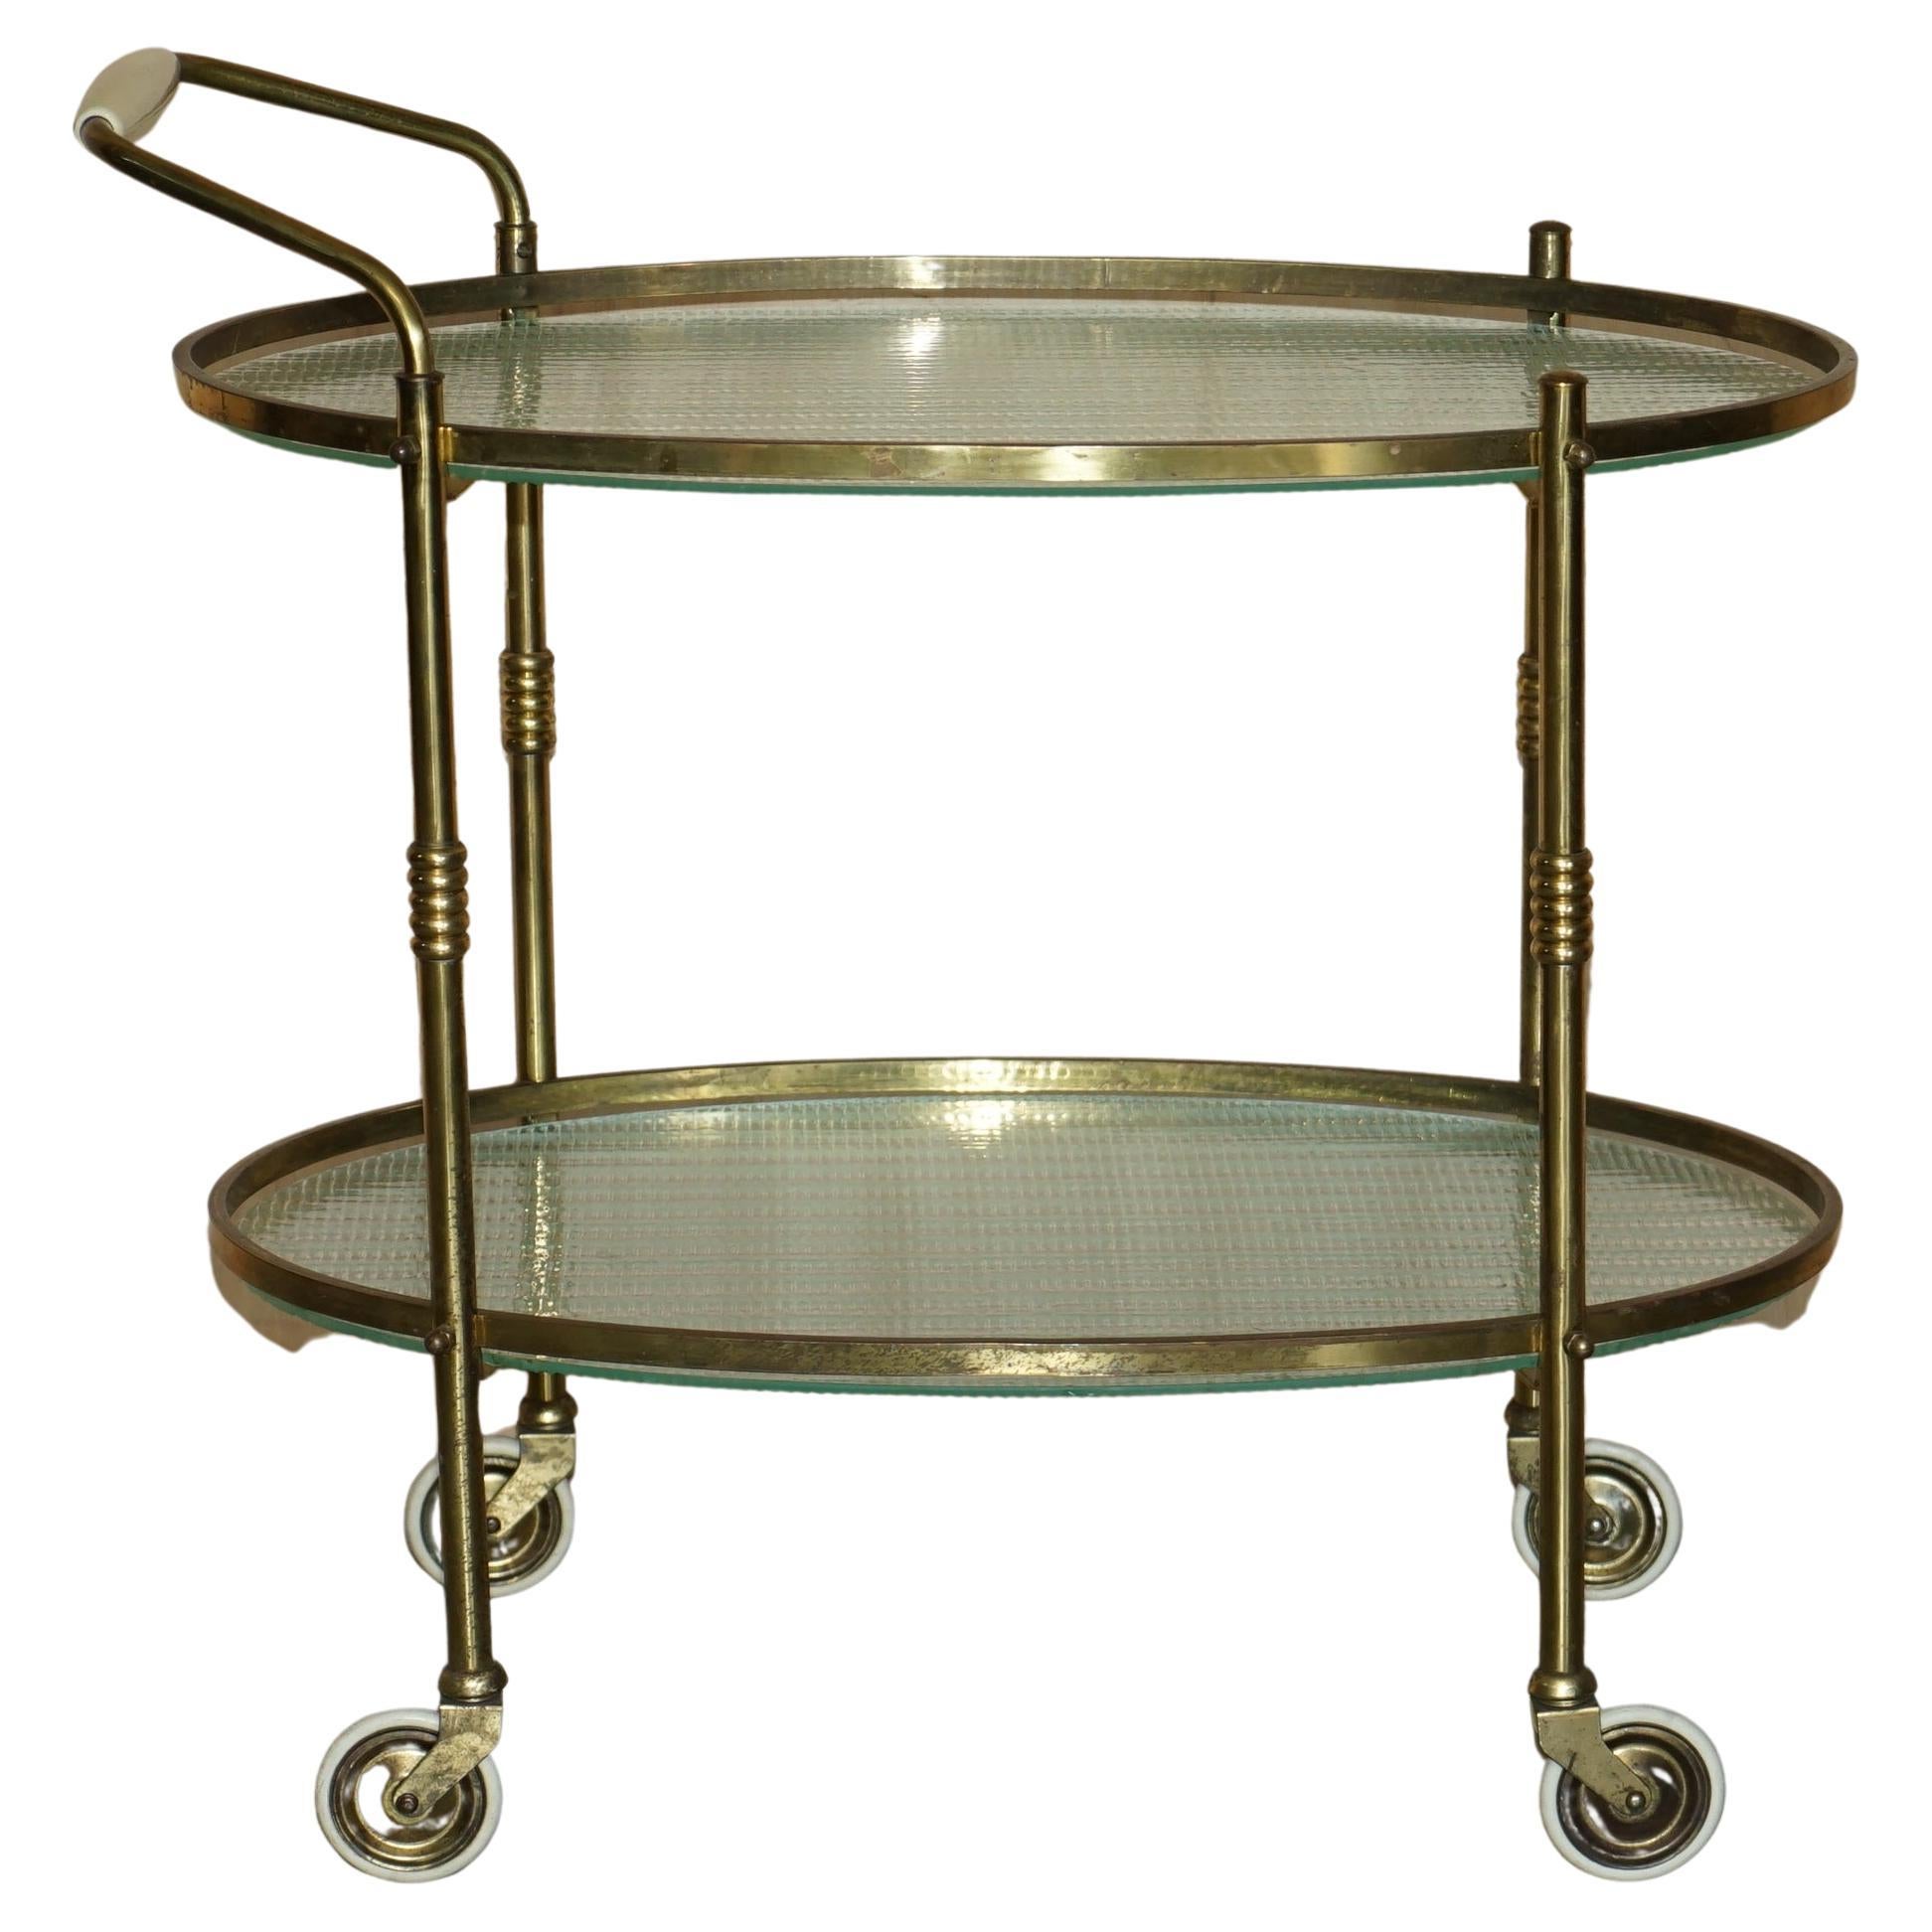 Antique Art Deco circa 1920 Frosted Glass & Polished Brass circa Drinks Trolley